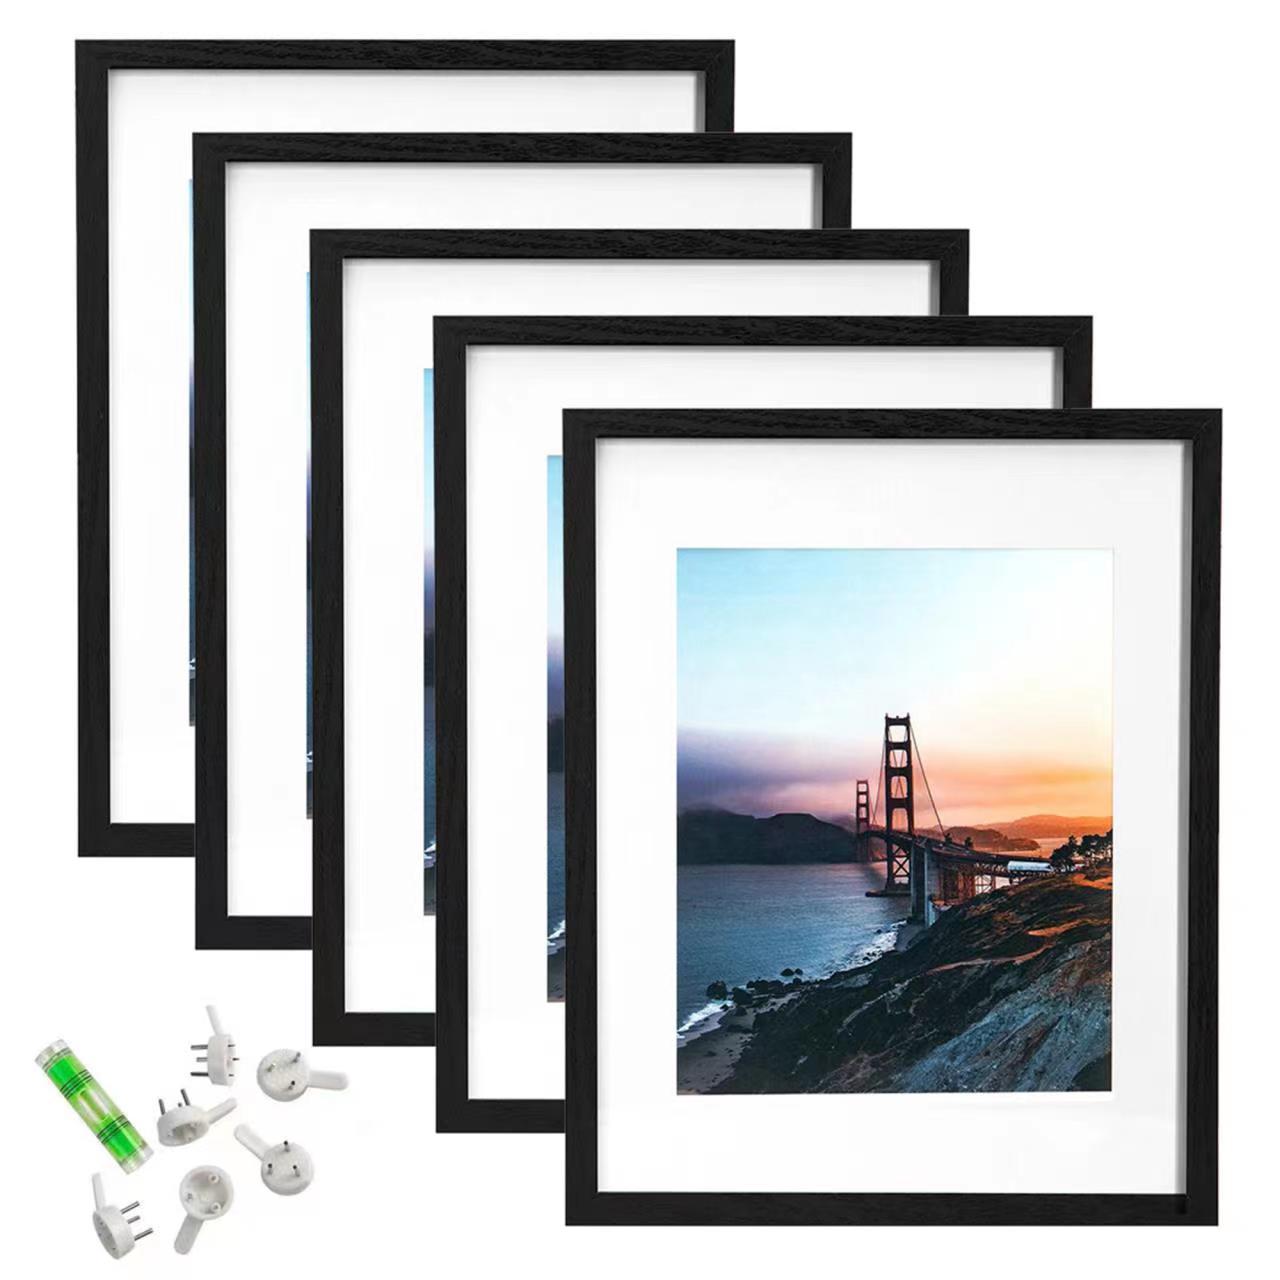 Amazon Hot 3-Piece Set A4 Certificate Holder Table-Top Wall Hangings Source Factory Ps Photo Frame Customized Wholesale